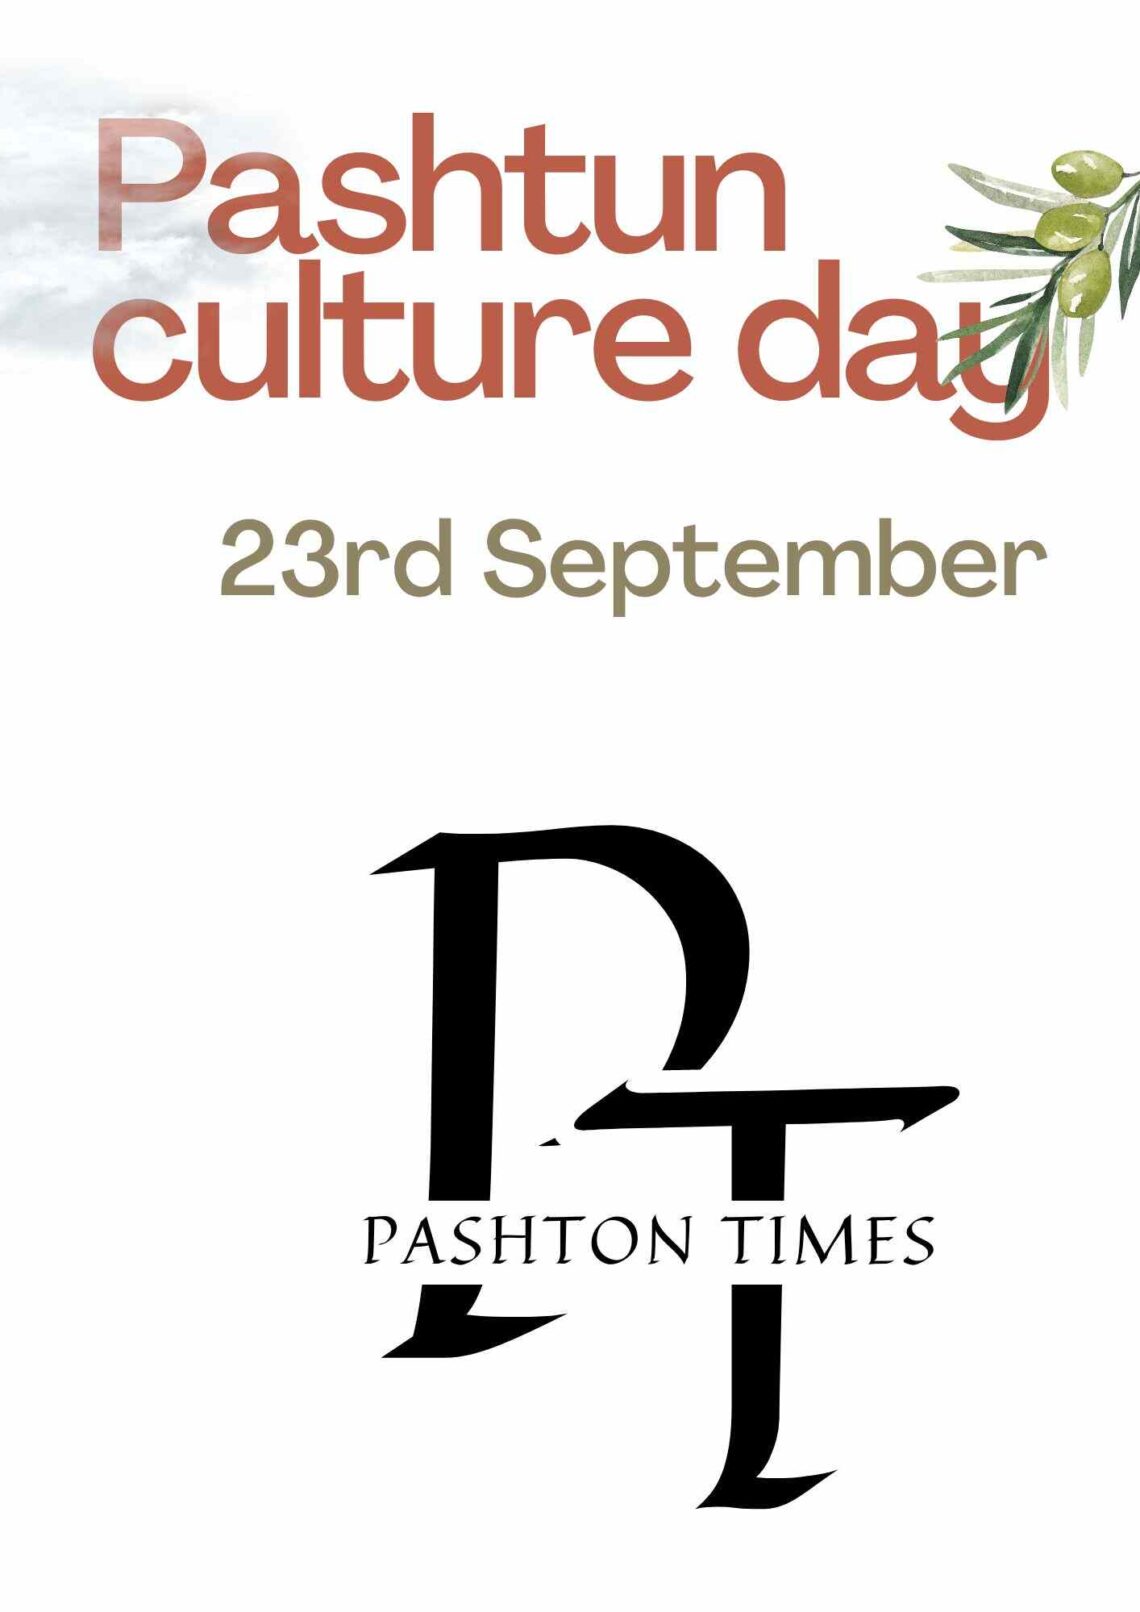 Pashtun Culture day written in in red colour with 23rd september in black colour with white background